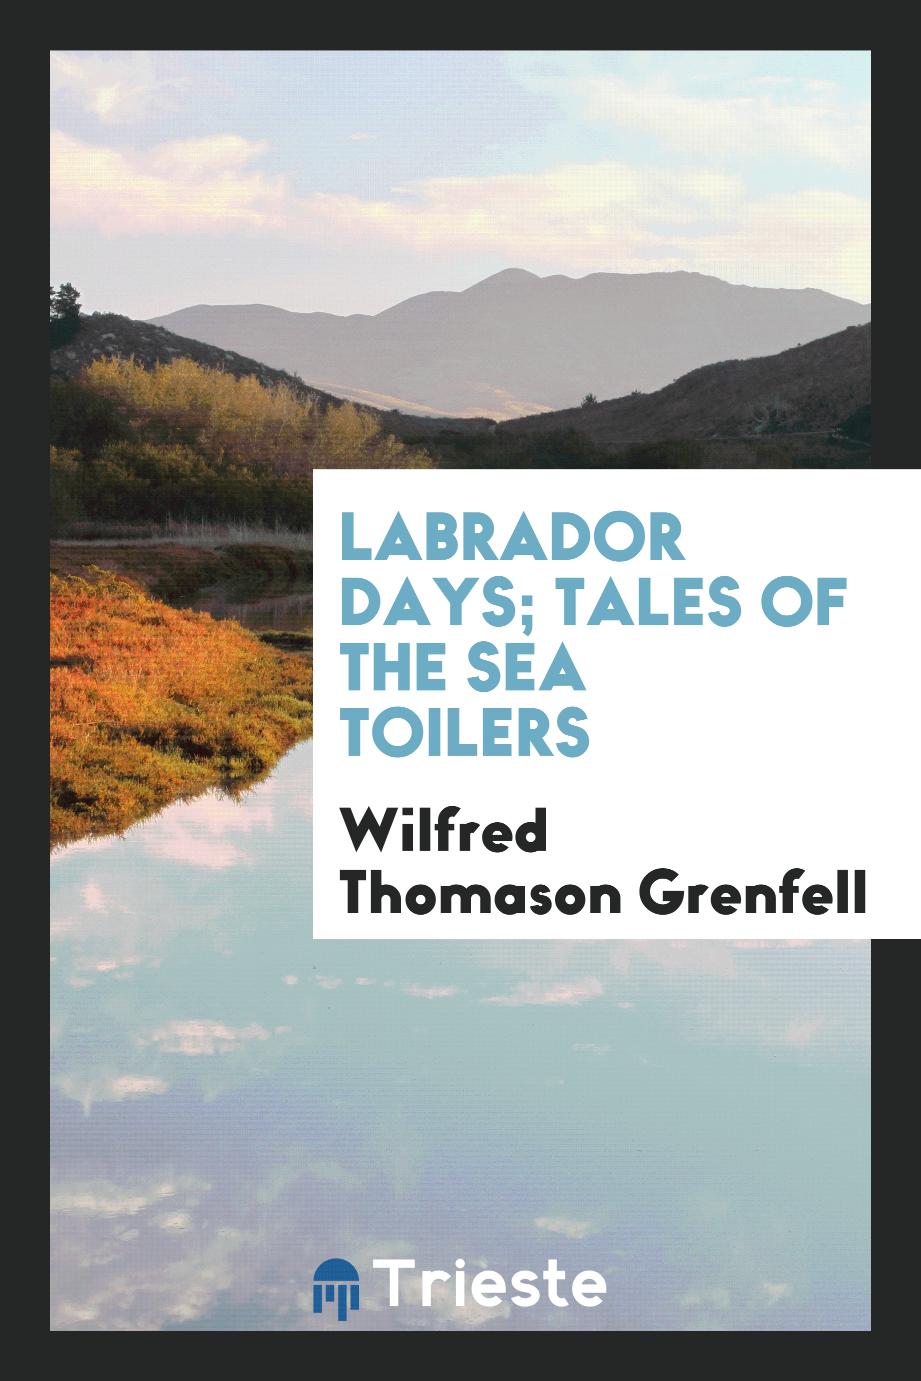 Labrador days; tales of the sea toilers